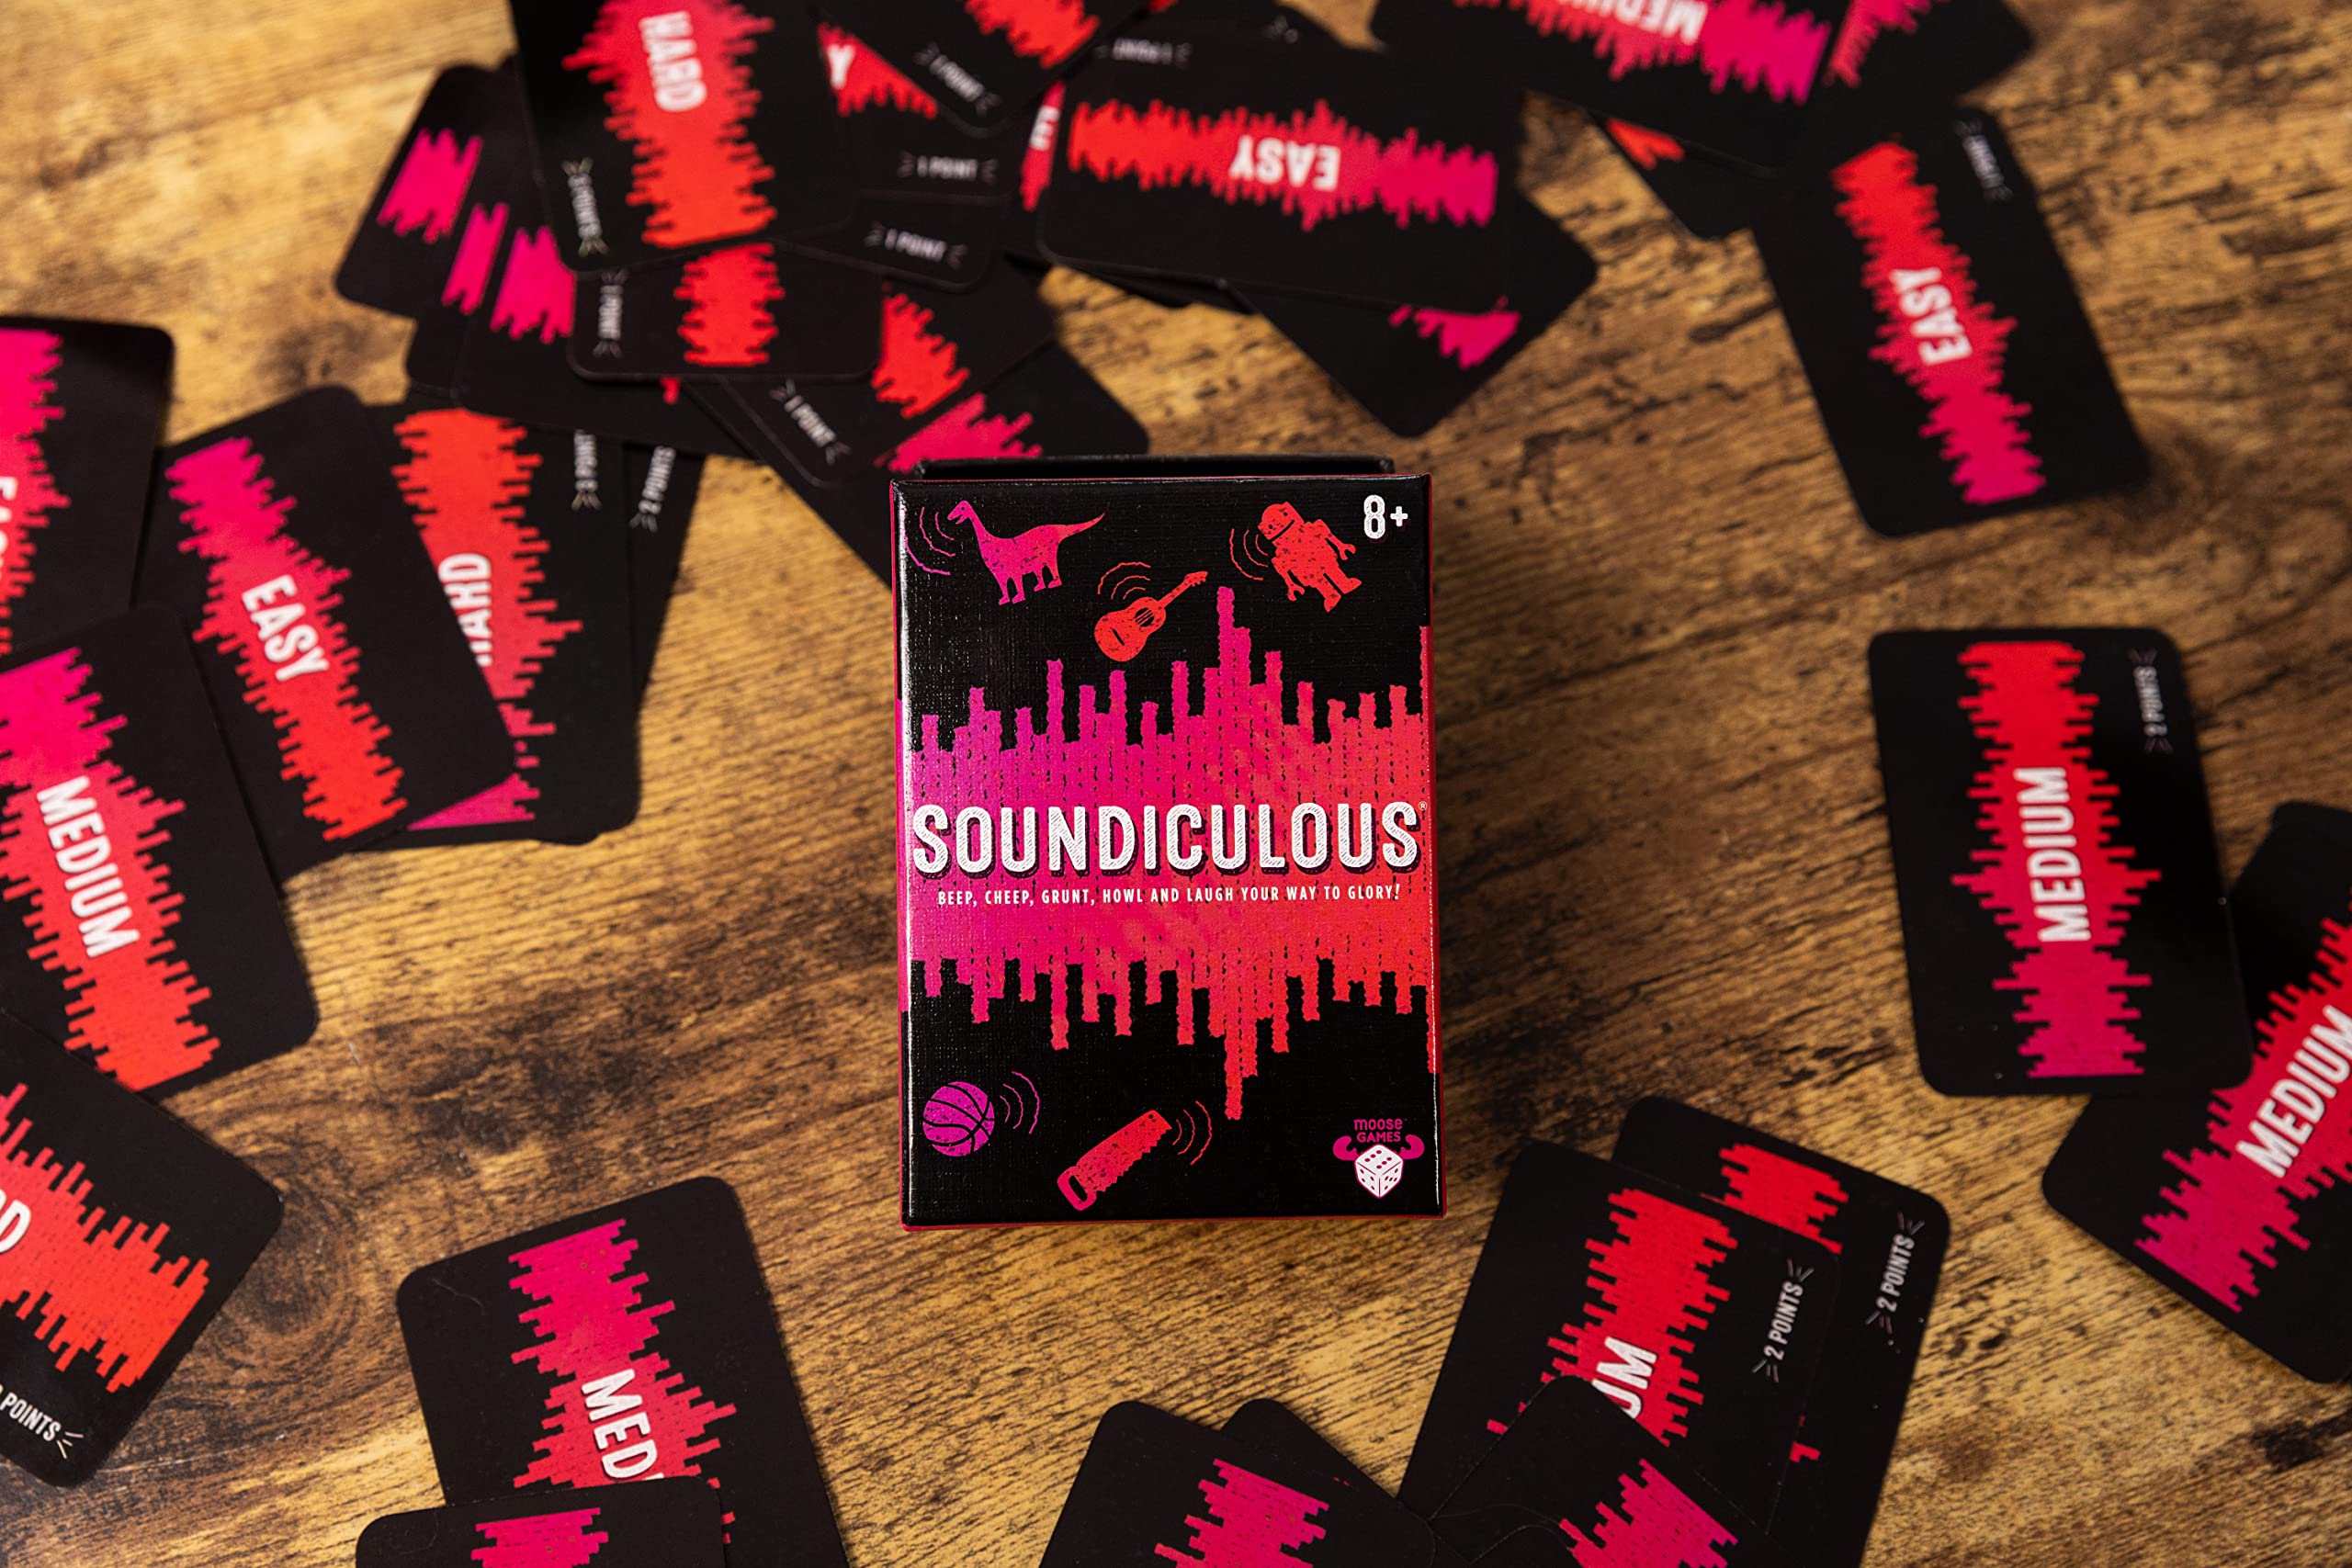 Soundiculous - Moose Games: The Hilarious Pocketsize Party Game of Ridiculous Sounds That Gets The Whole Family Laughing